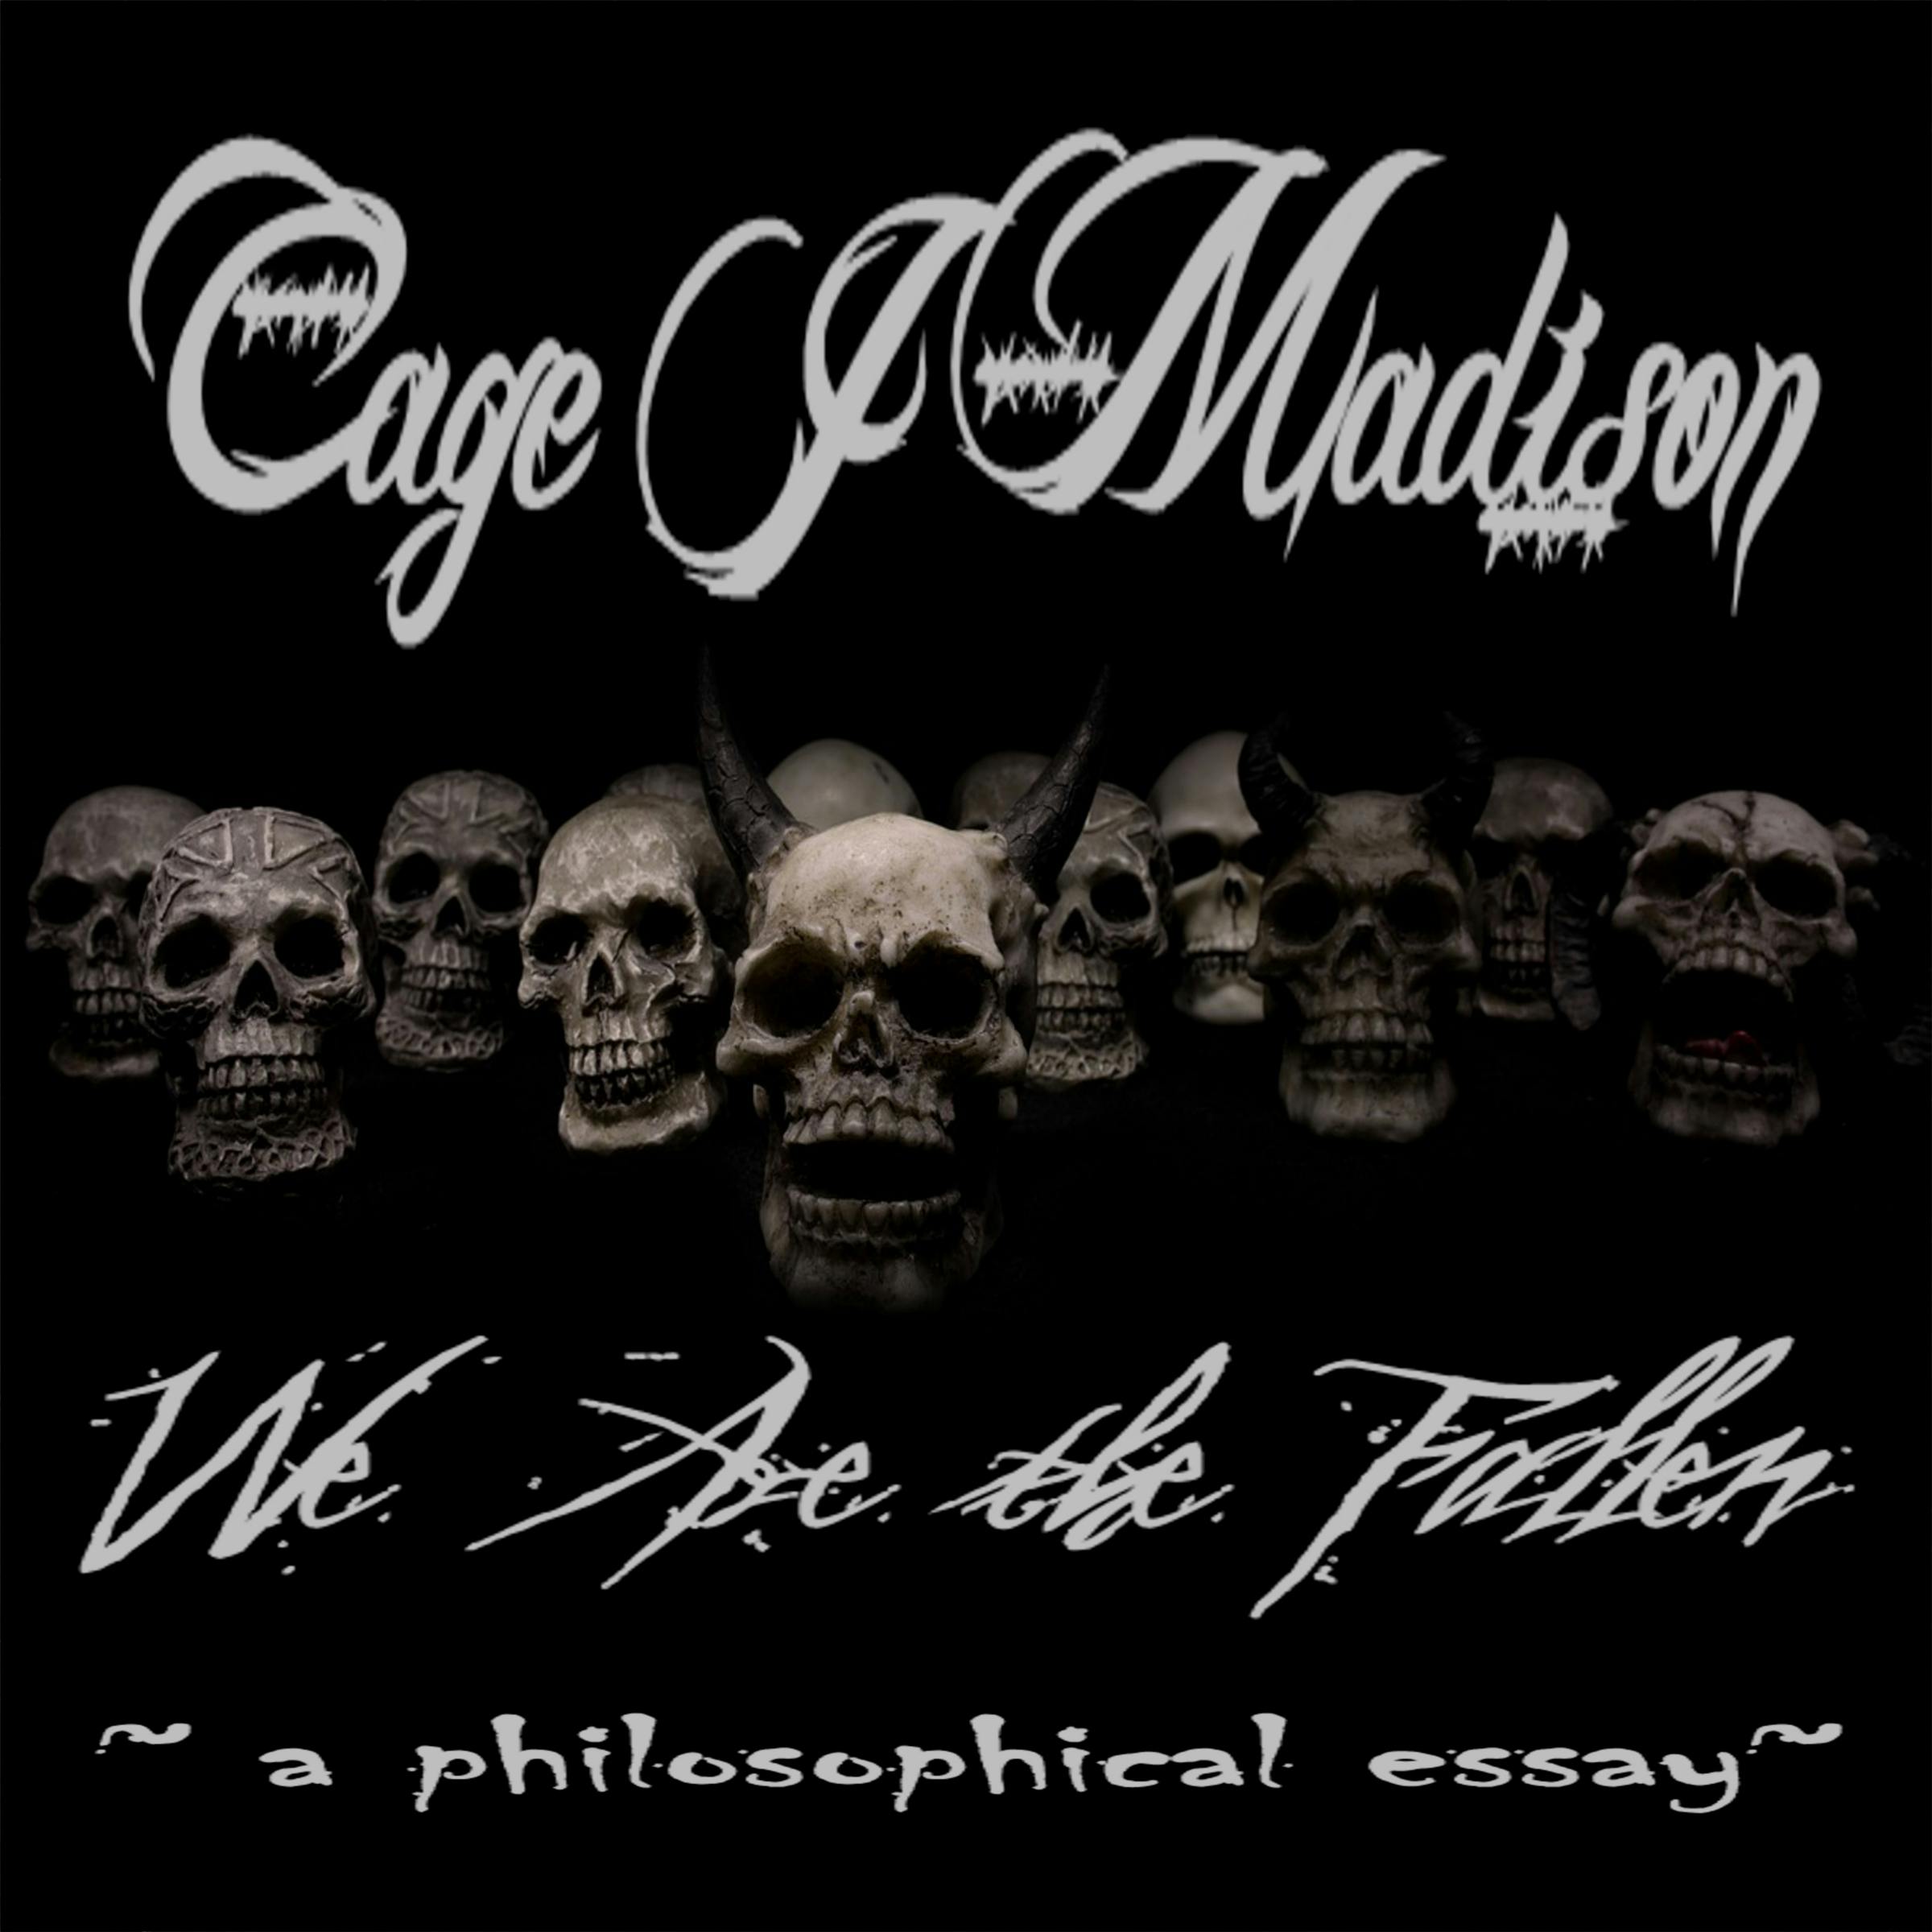 We Are the Fallen: A Philosophical Essay - Cage J Madison